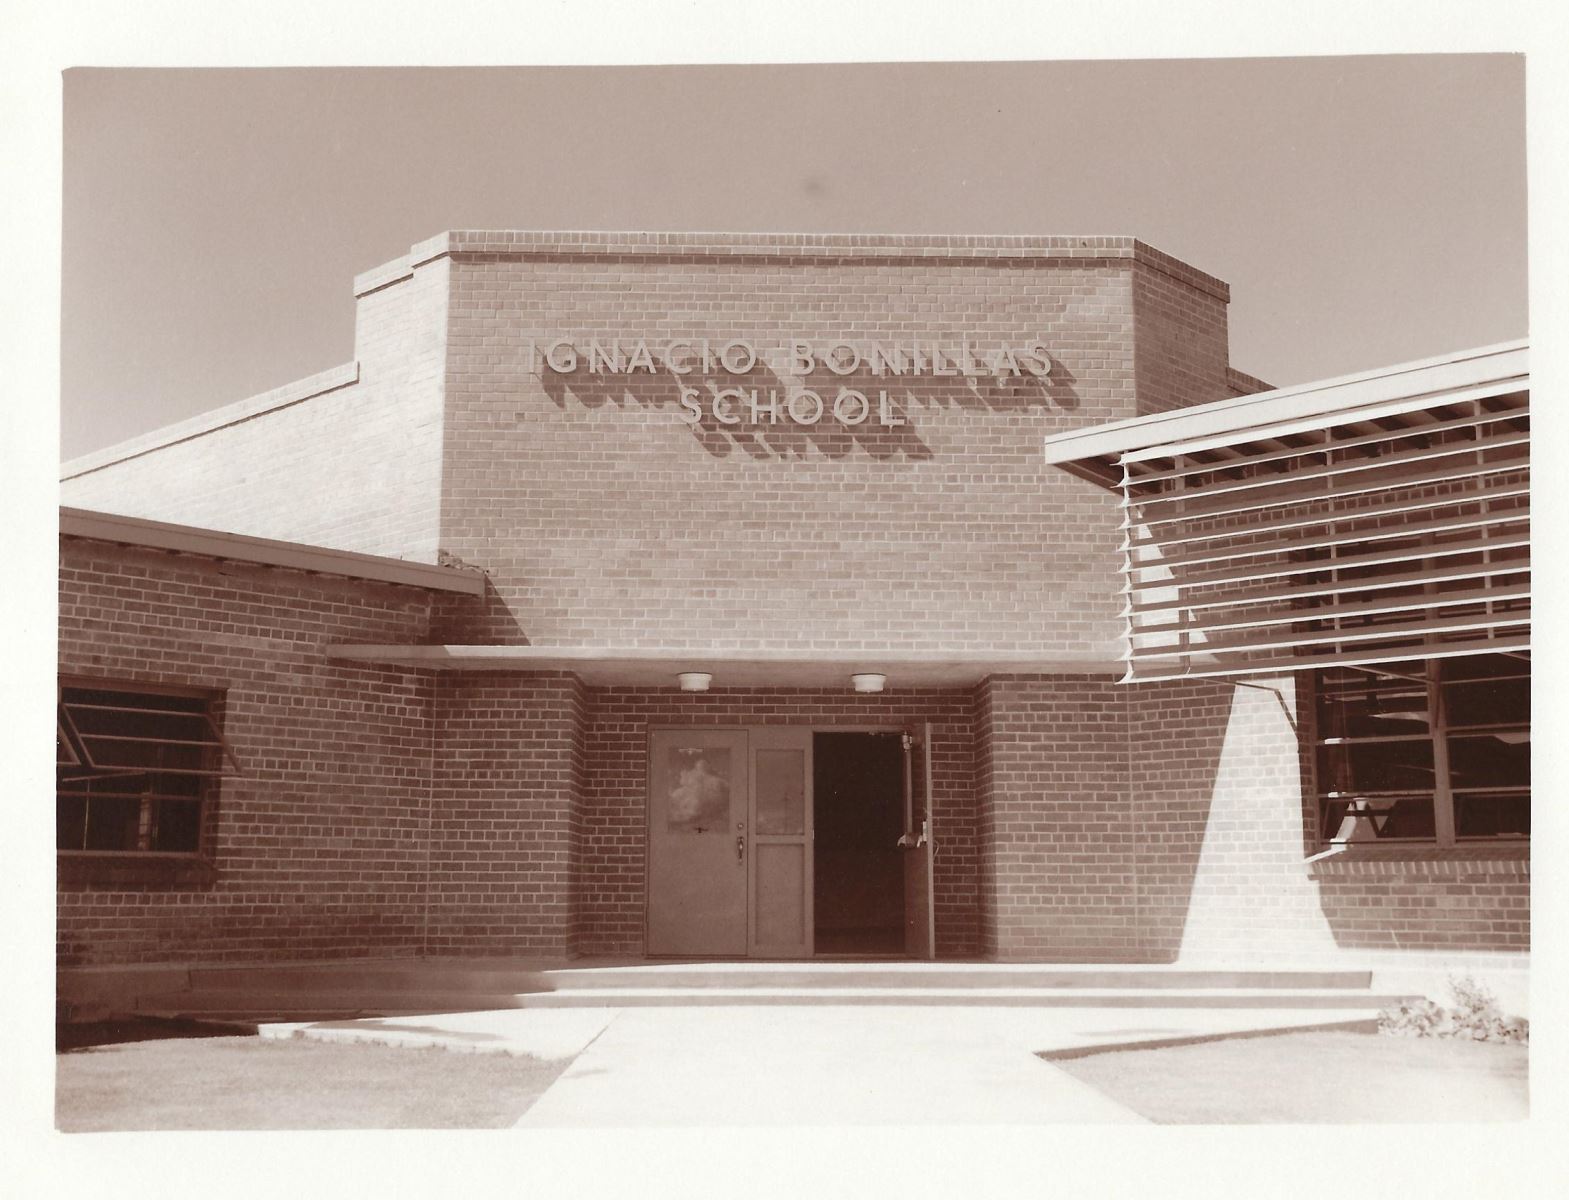 Photo of Bonillas Campus from 1954